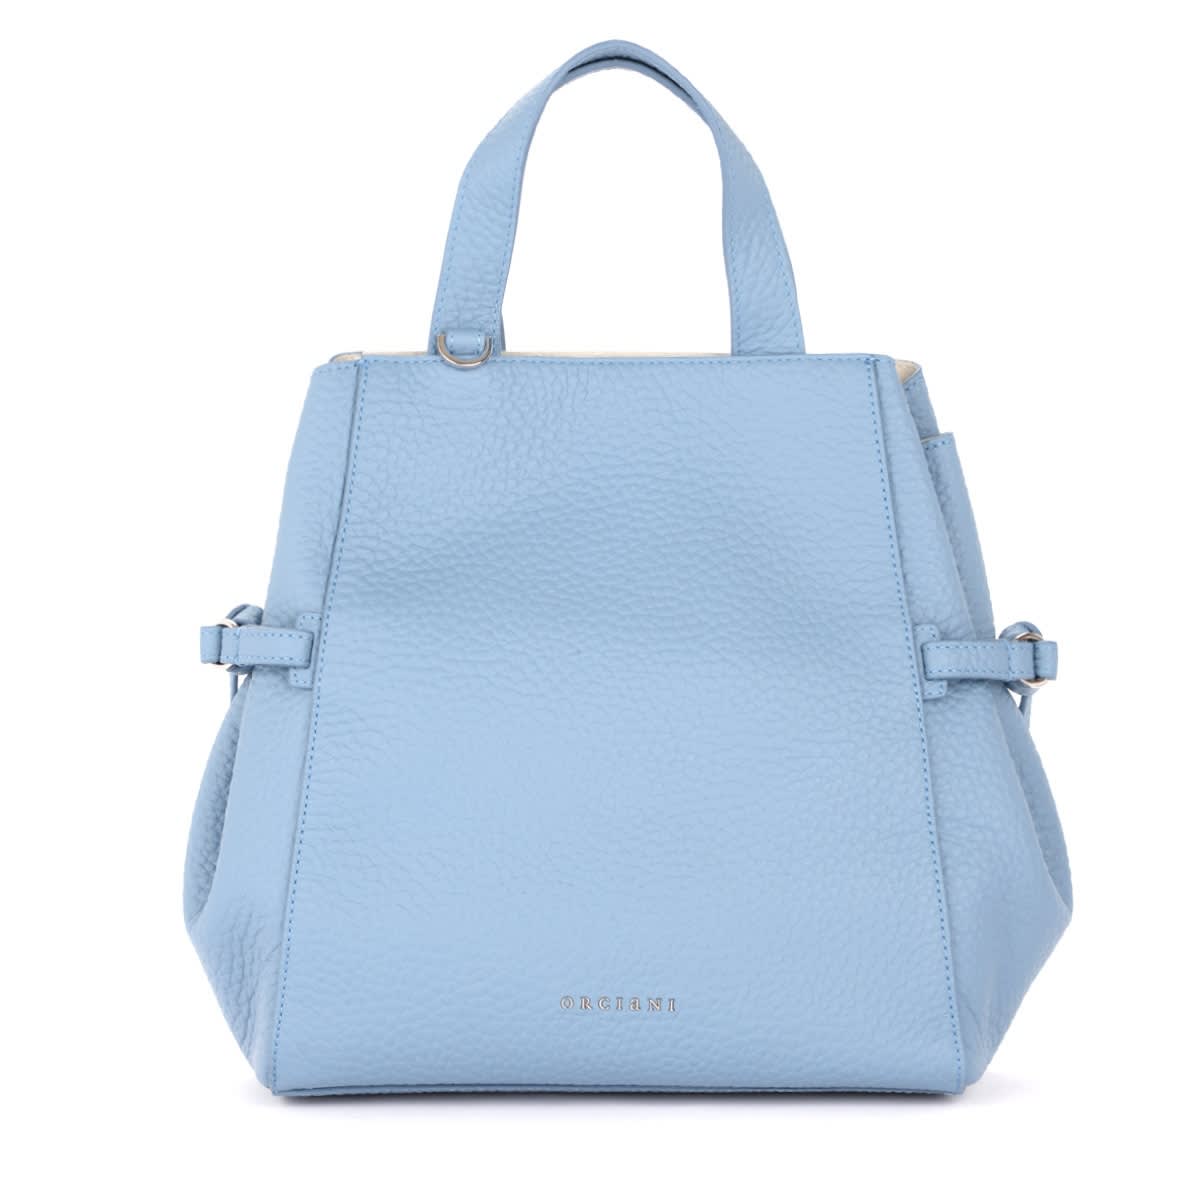 ORCIANI SHOULDER BAG IN BLUE GRAINED LEATHER,11285140